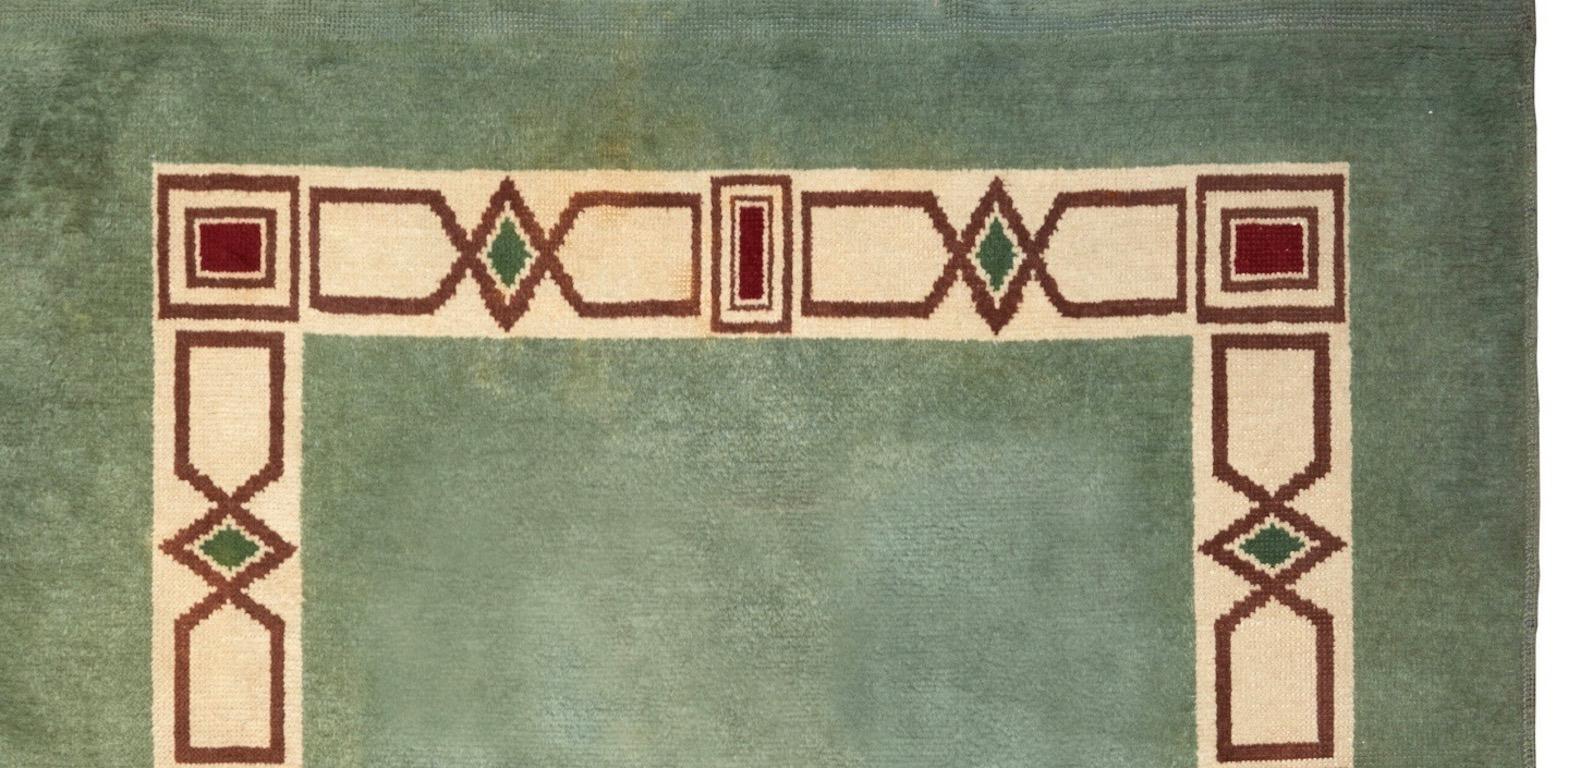 Rectangular woolen rug with geometrical green, burgundy and off-white decoration on a celadon green background.

Signed Leleu in a corner.